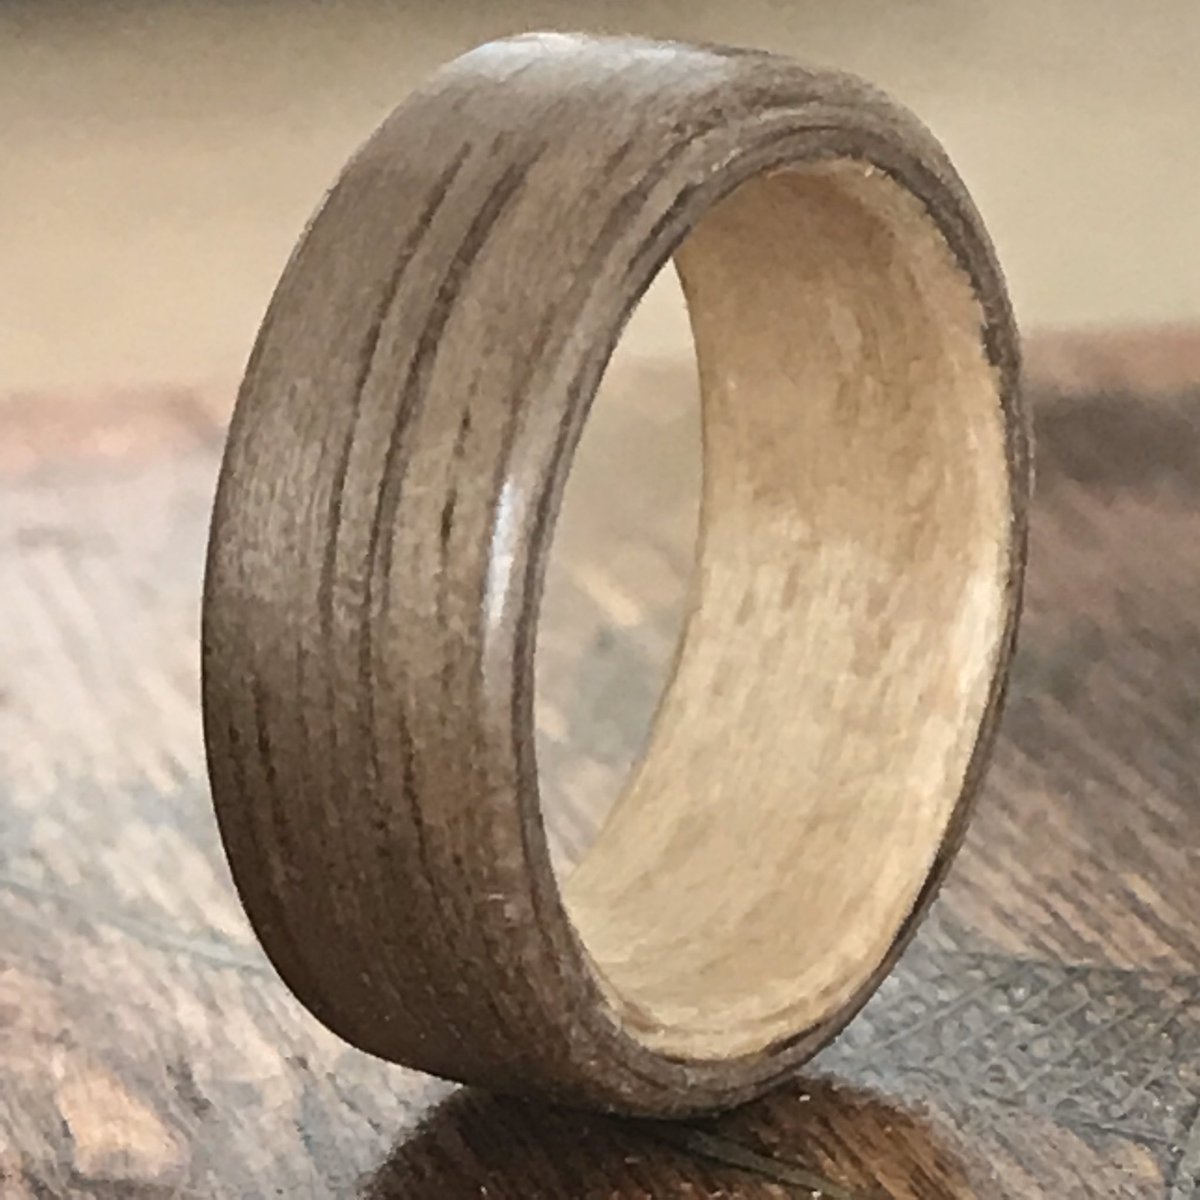 Tried my hand at ring making too - hoping to come back to this soon!

#ring #ringmaking #bentwood #engrave #japanese #power